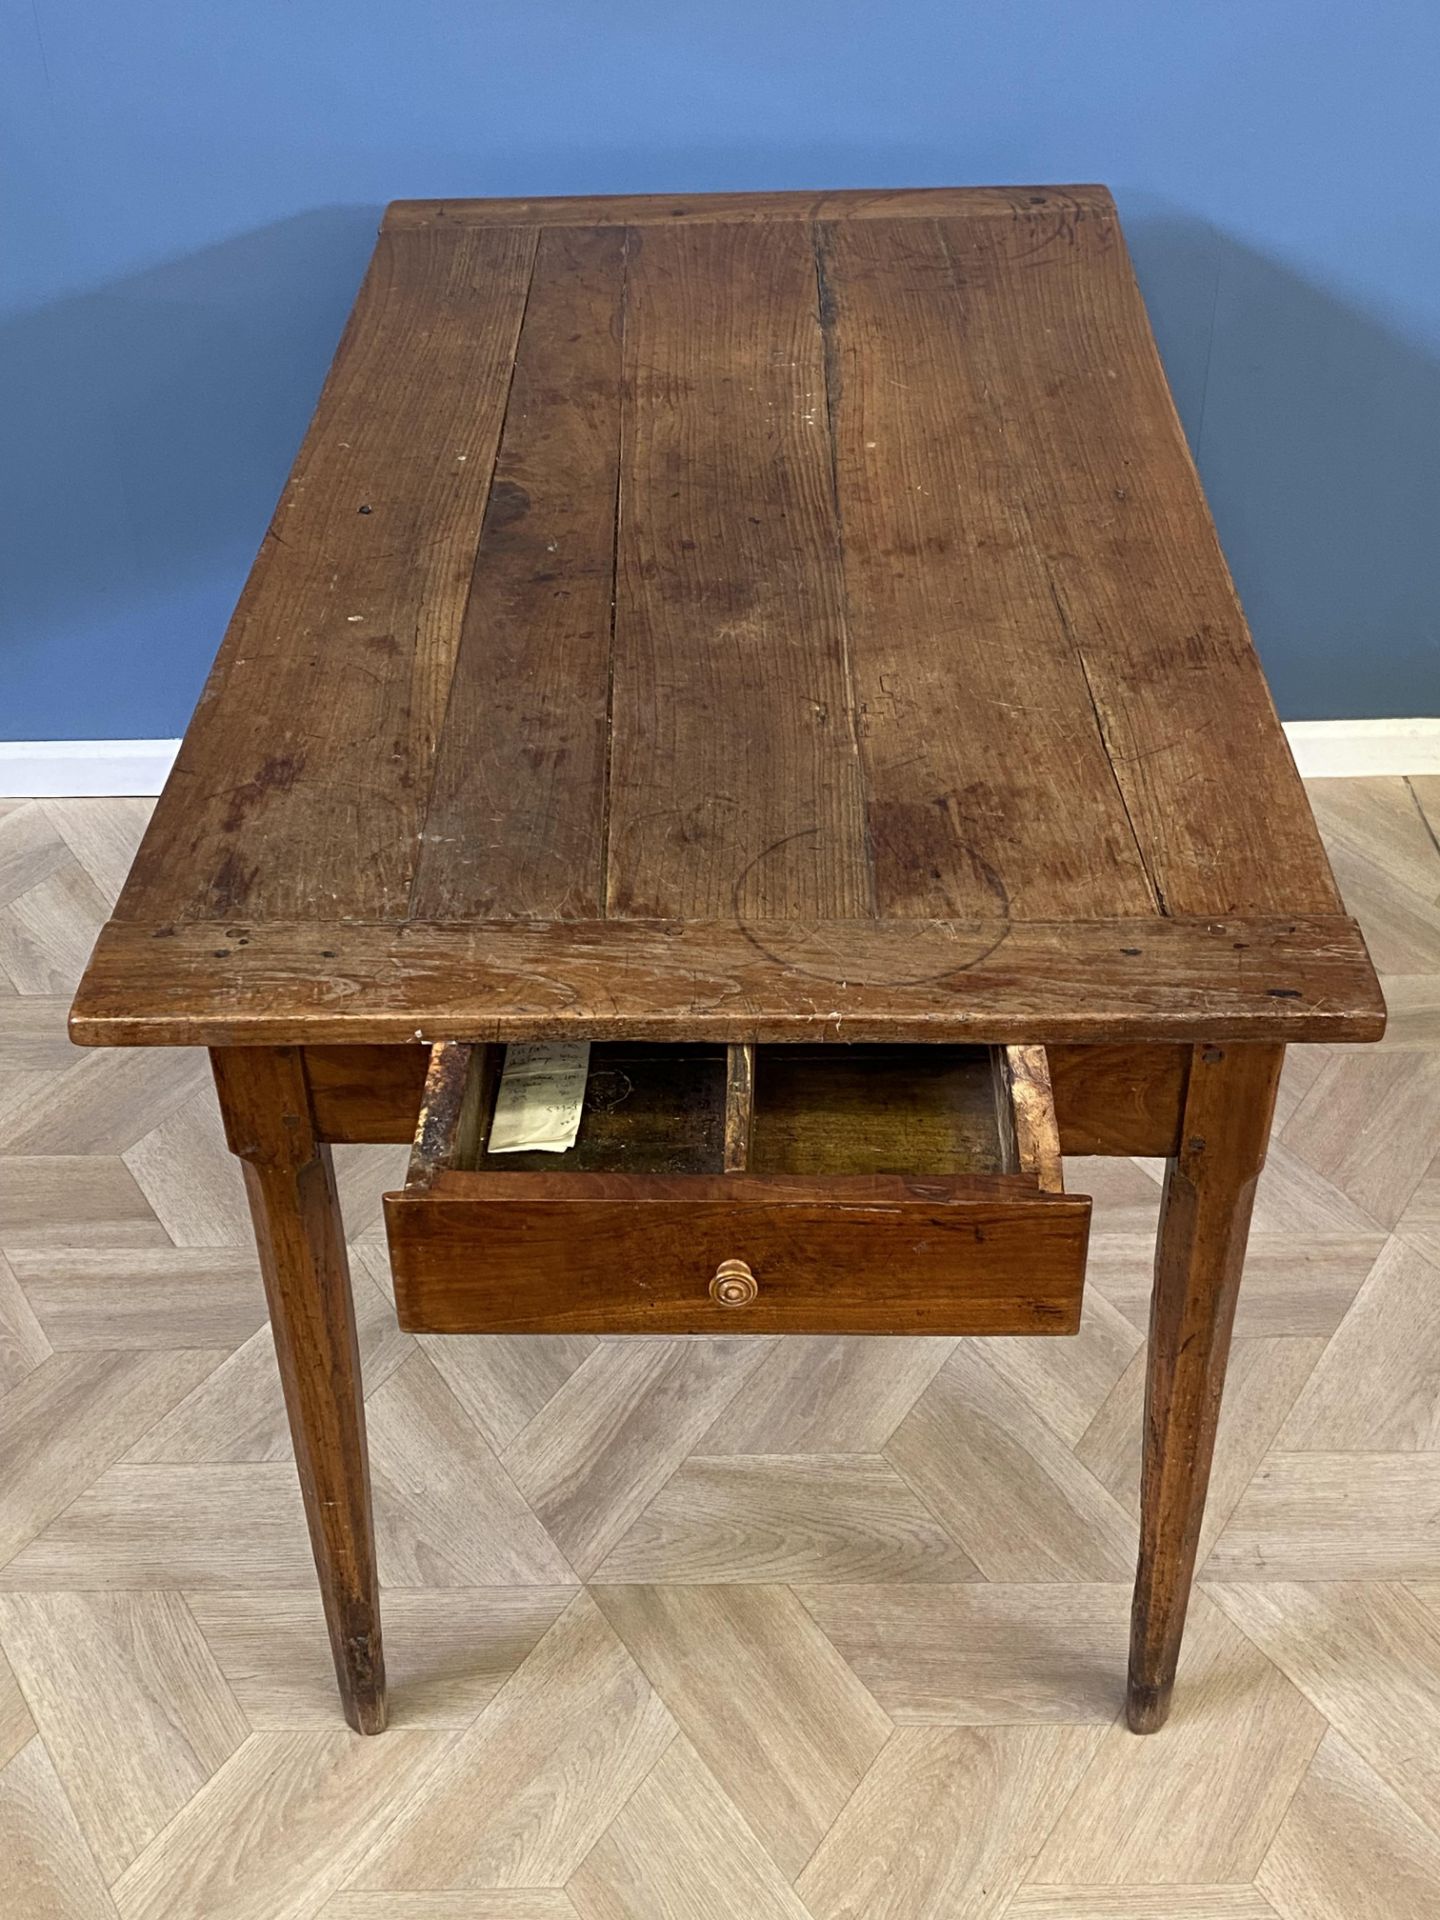 Early 19th century French fruitwood farmhouse table - Image 3 of 6